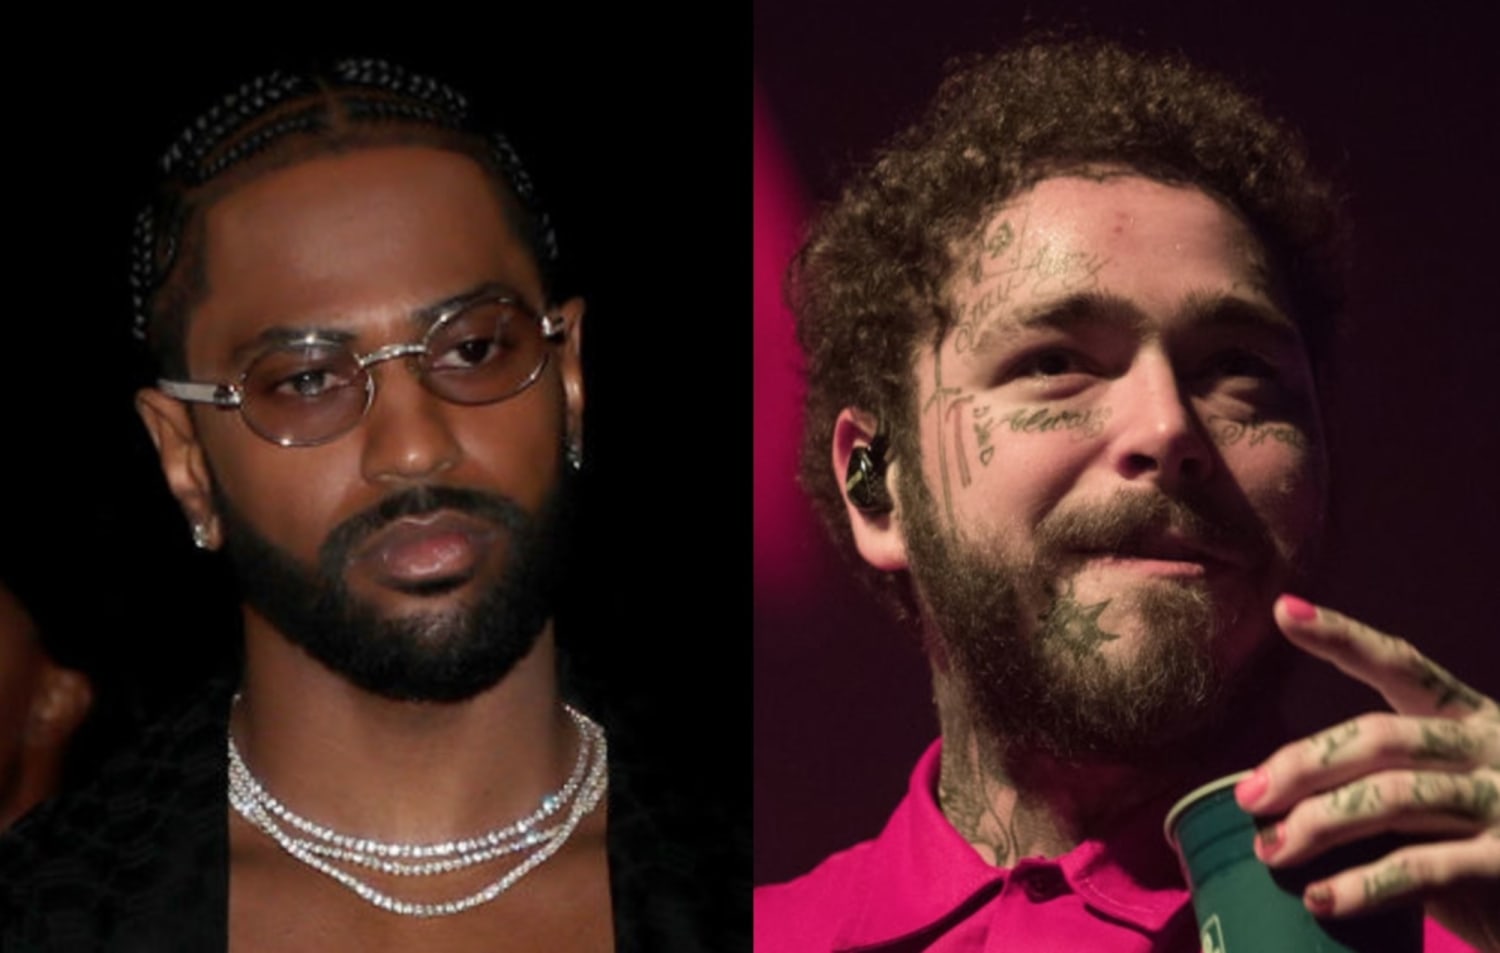 Big Sean shares haunting lyric video for new track 'Wolves' with Post Malone